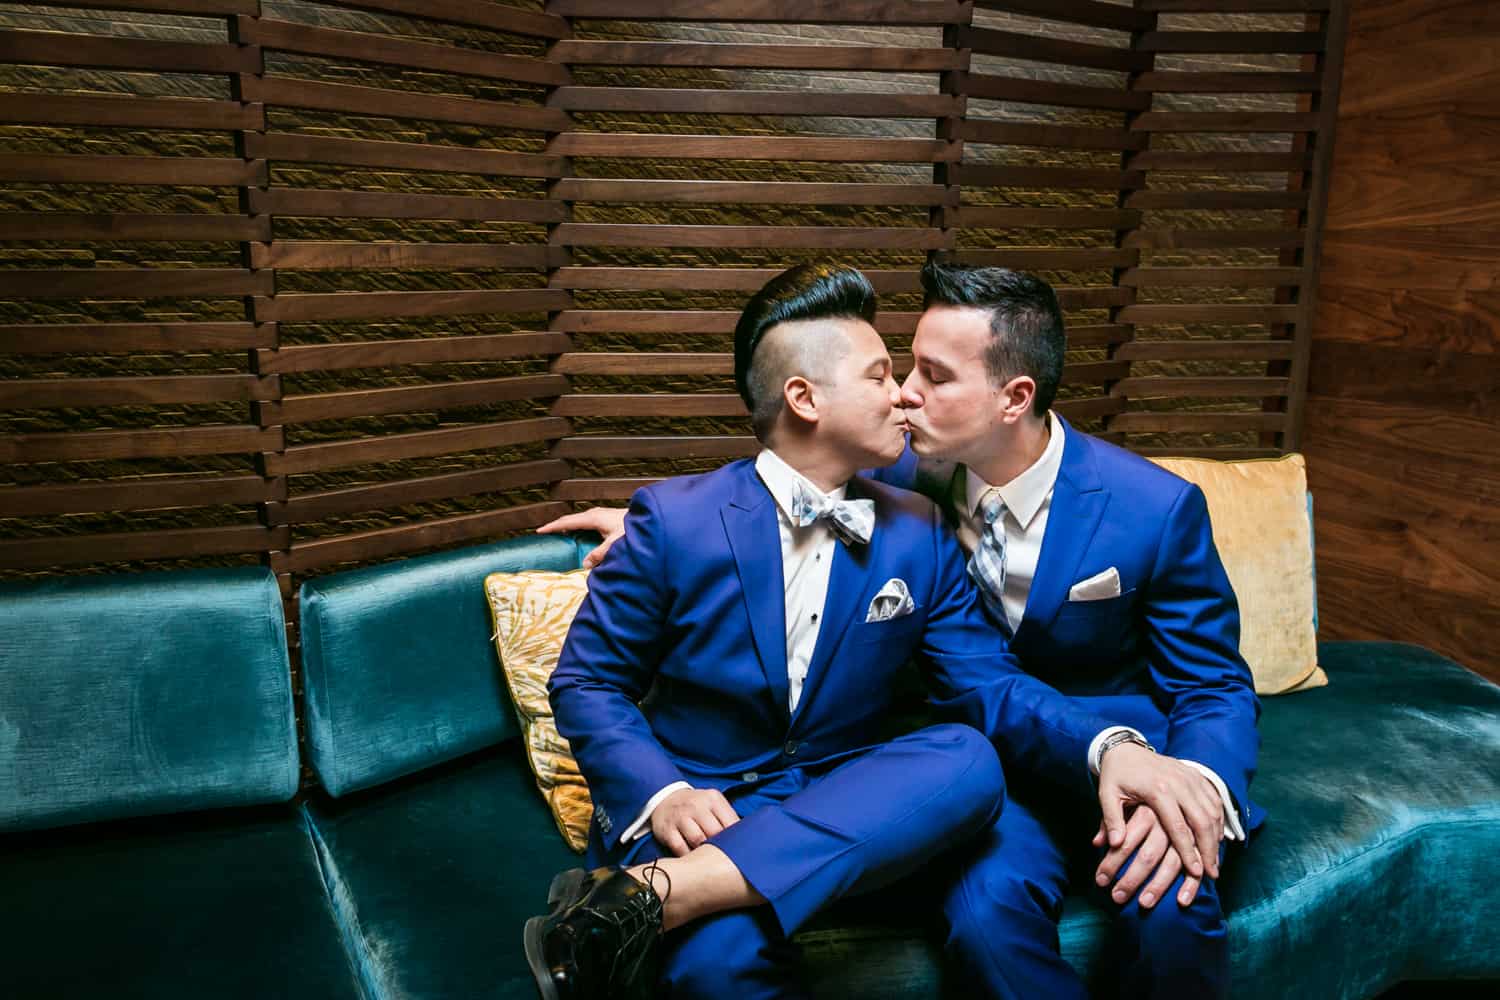 Two grooms in blue suits kissing on a couch